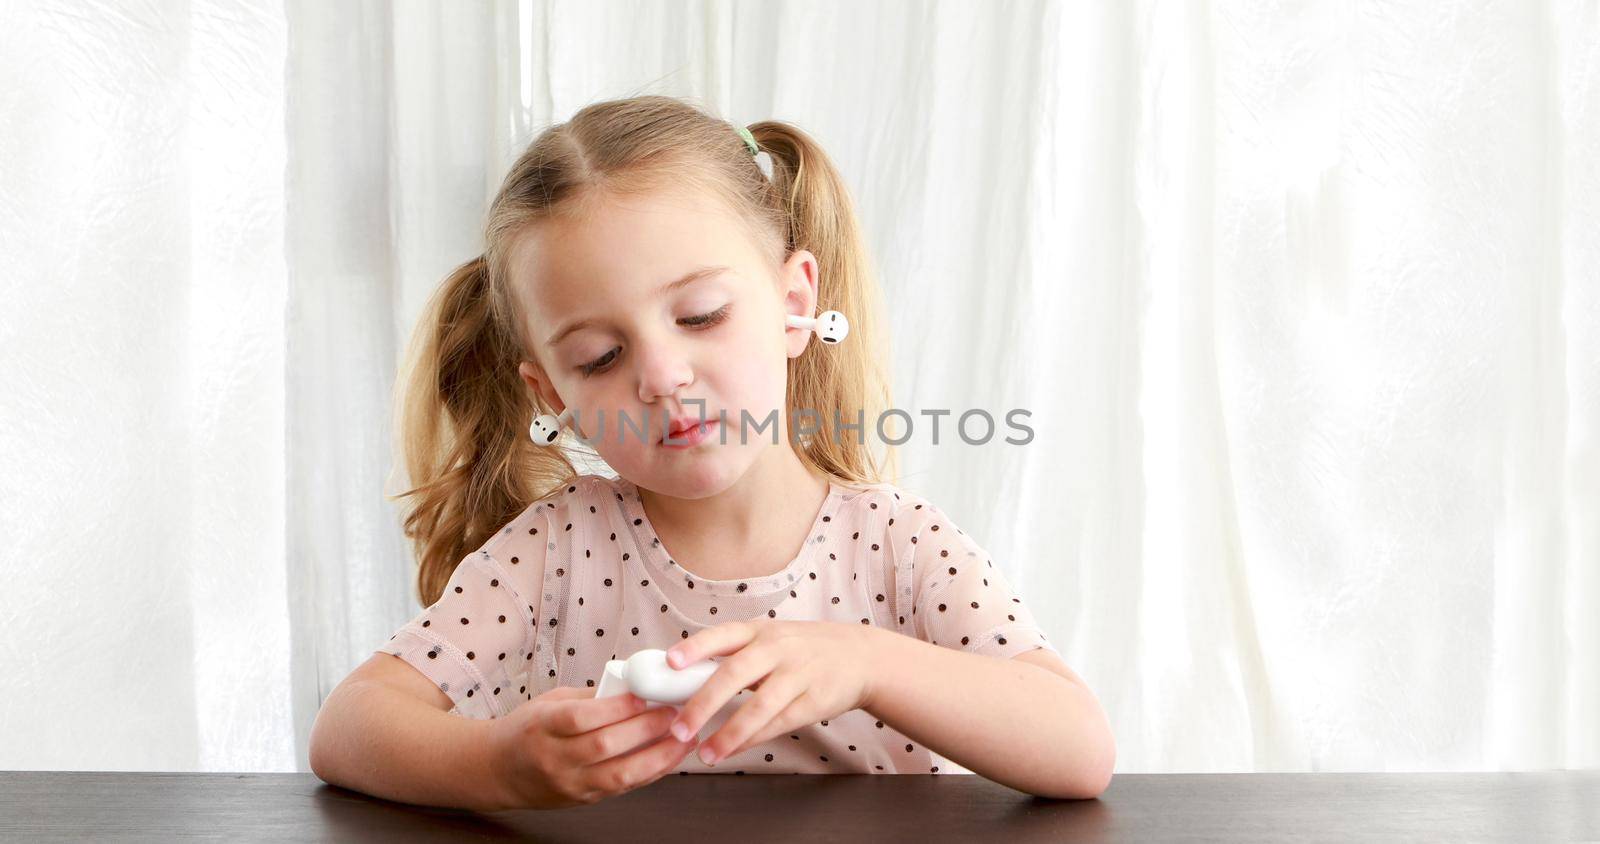 Kid playing with TWS earbuds white background by Demkat